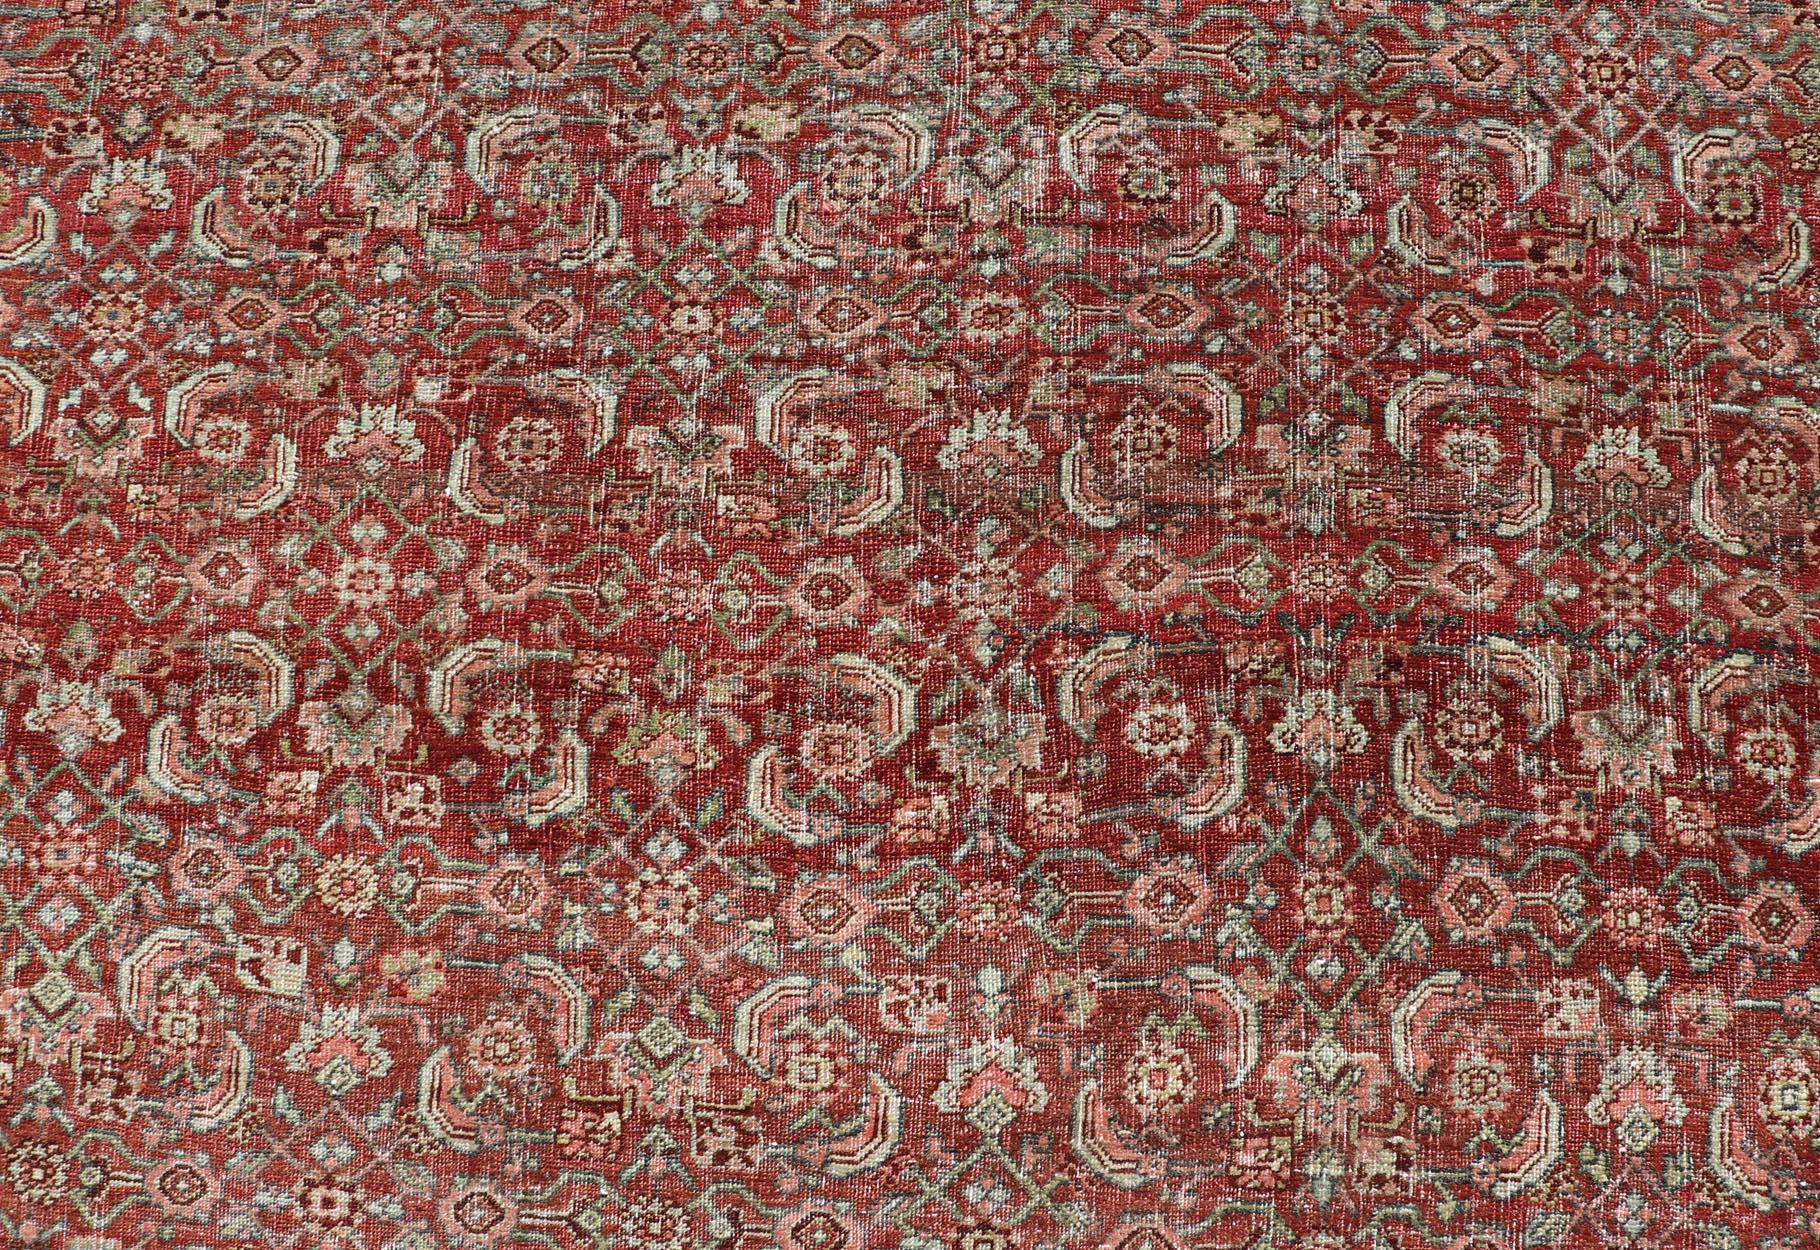 Palace Size Antique Persian Bidjar Rug in Shades of Red, Blue Grey & Lime Green For Sale 2